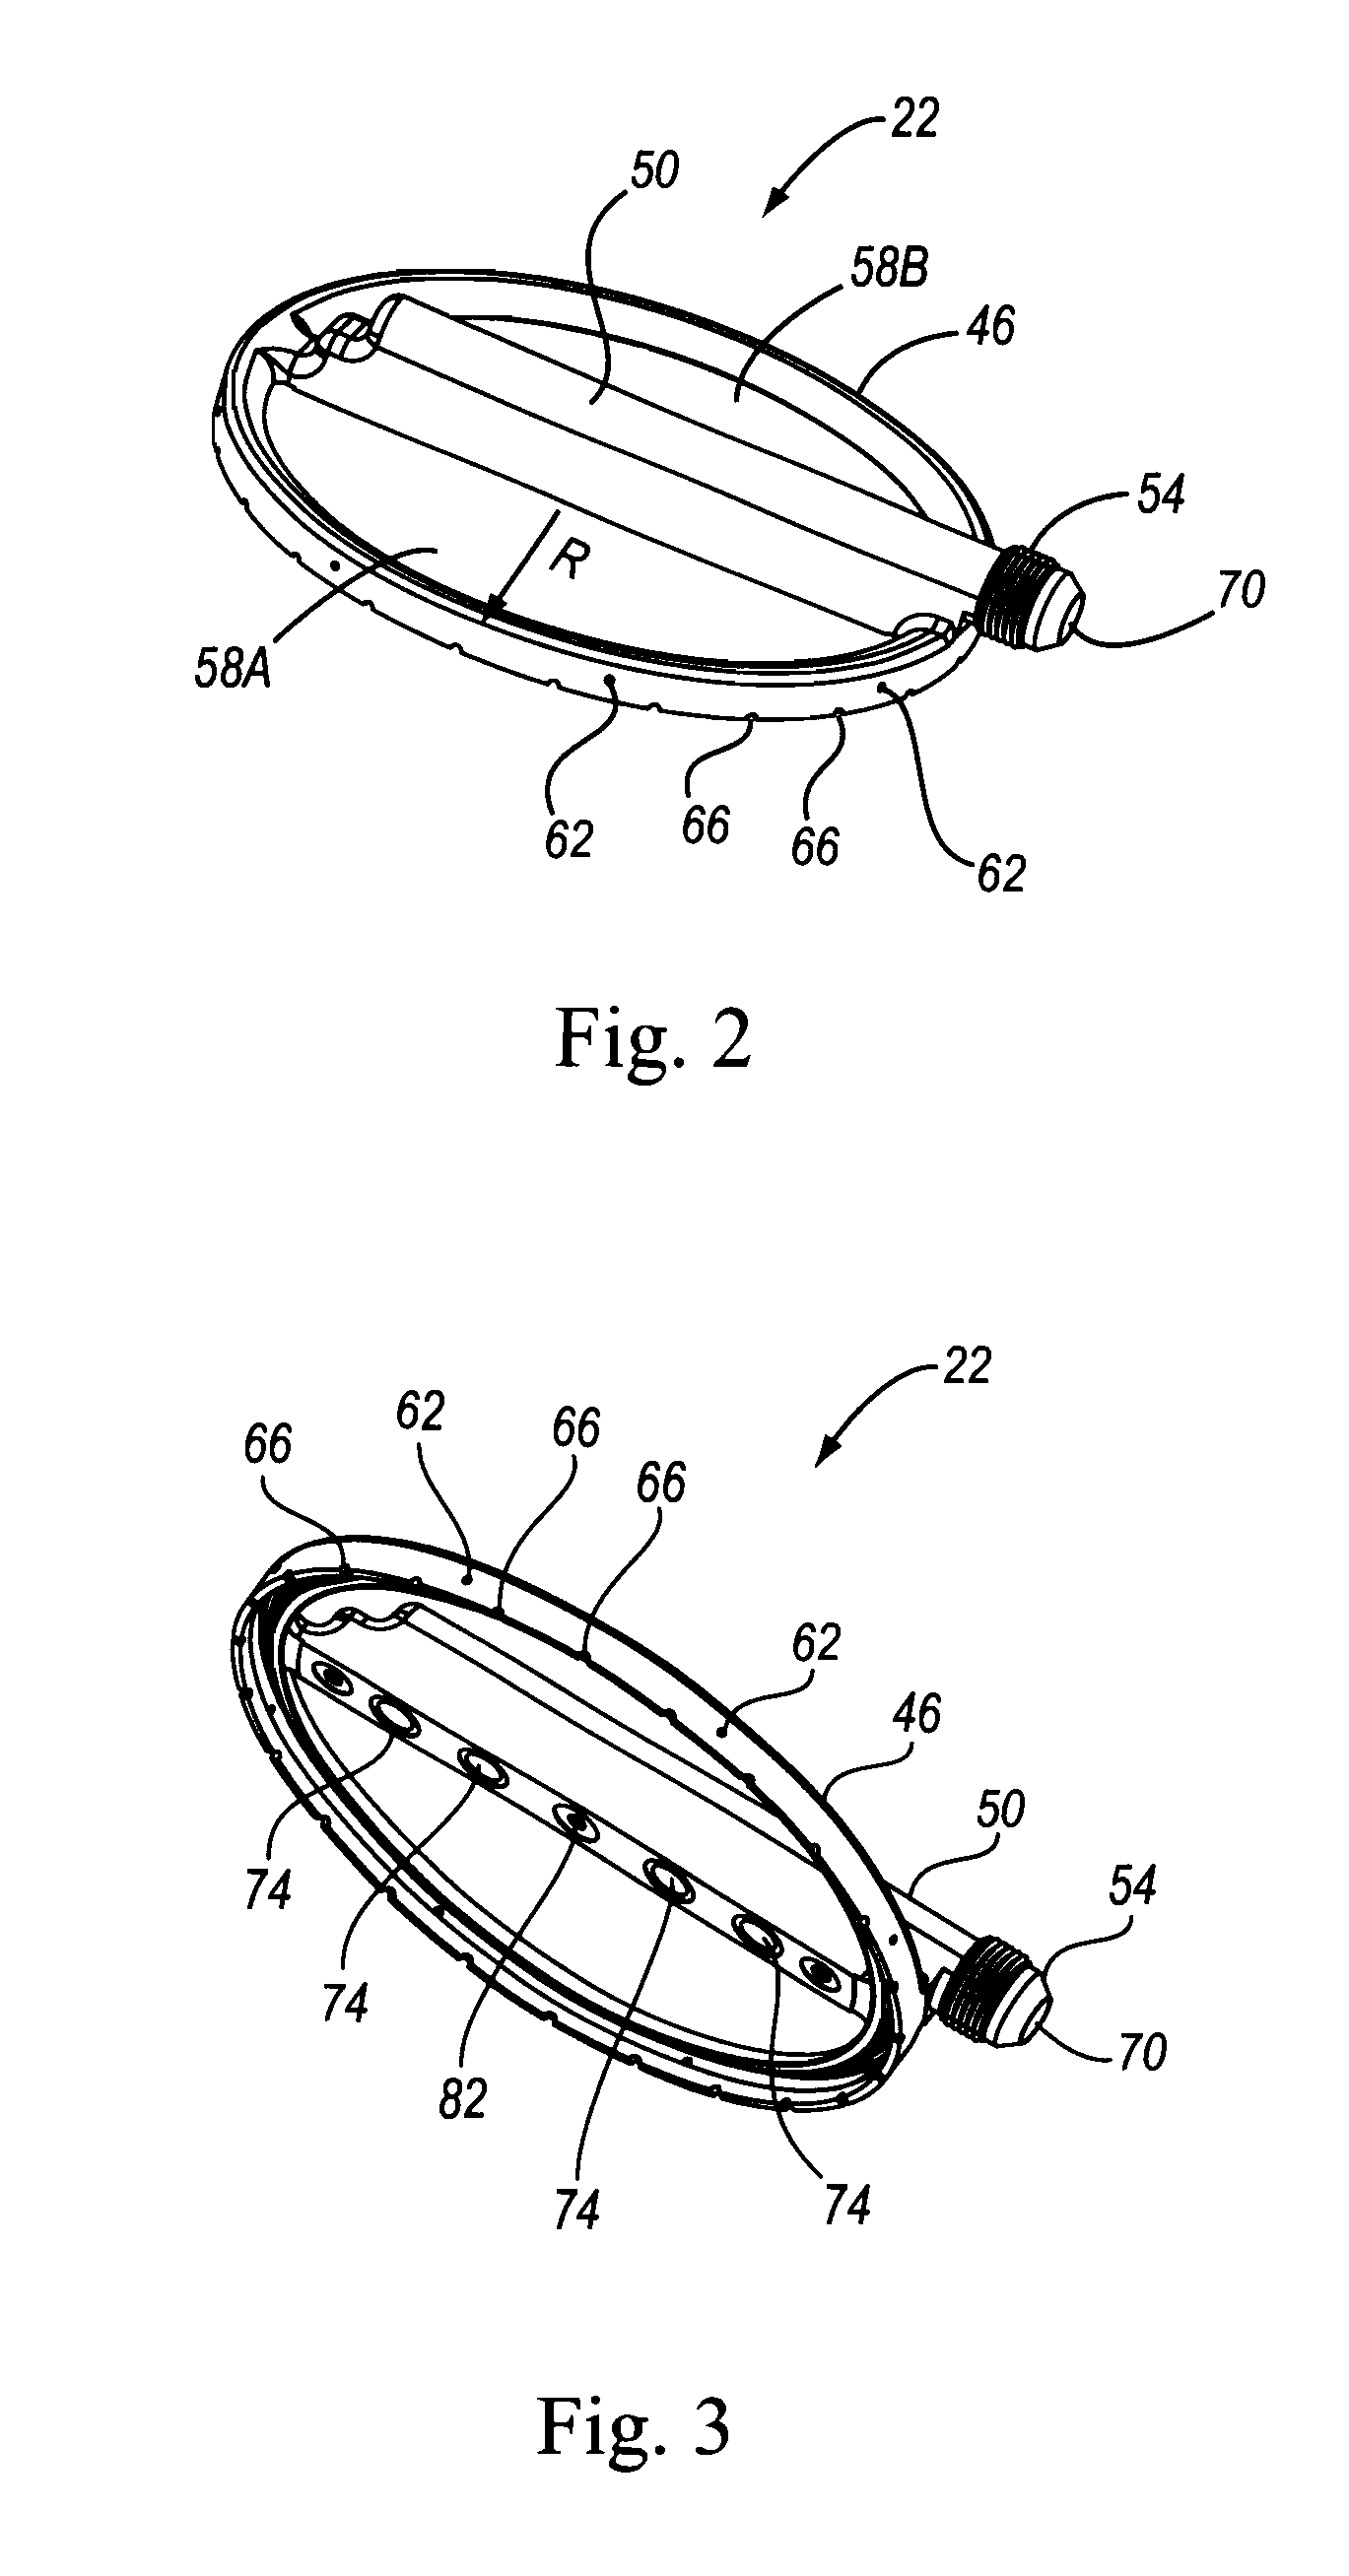 Aspirators with bodies comprising wound filaments